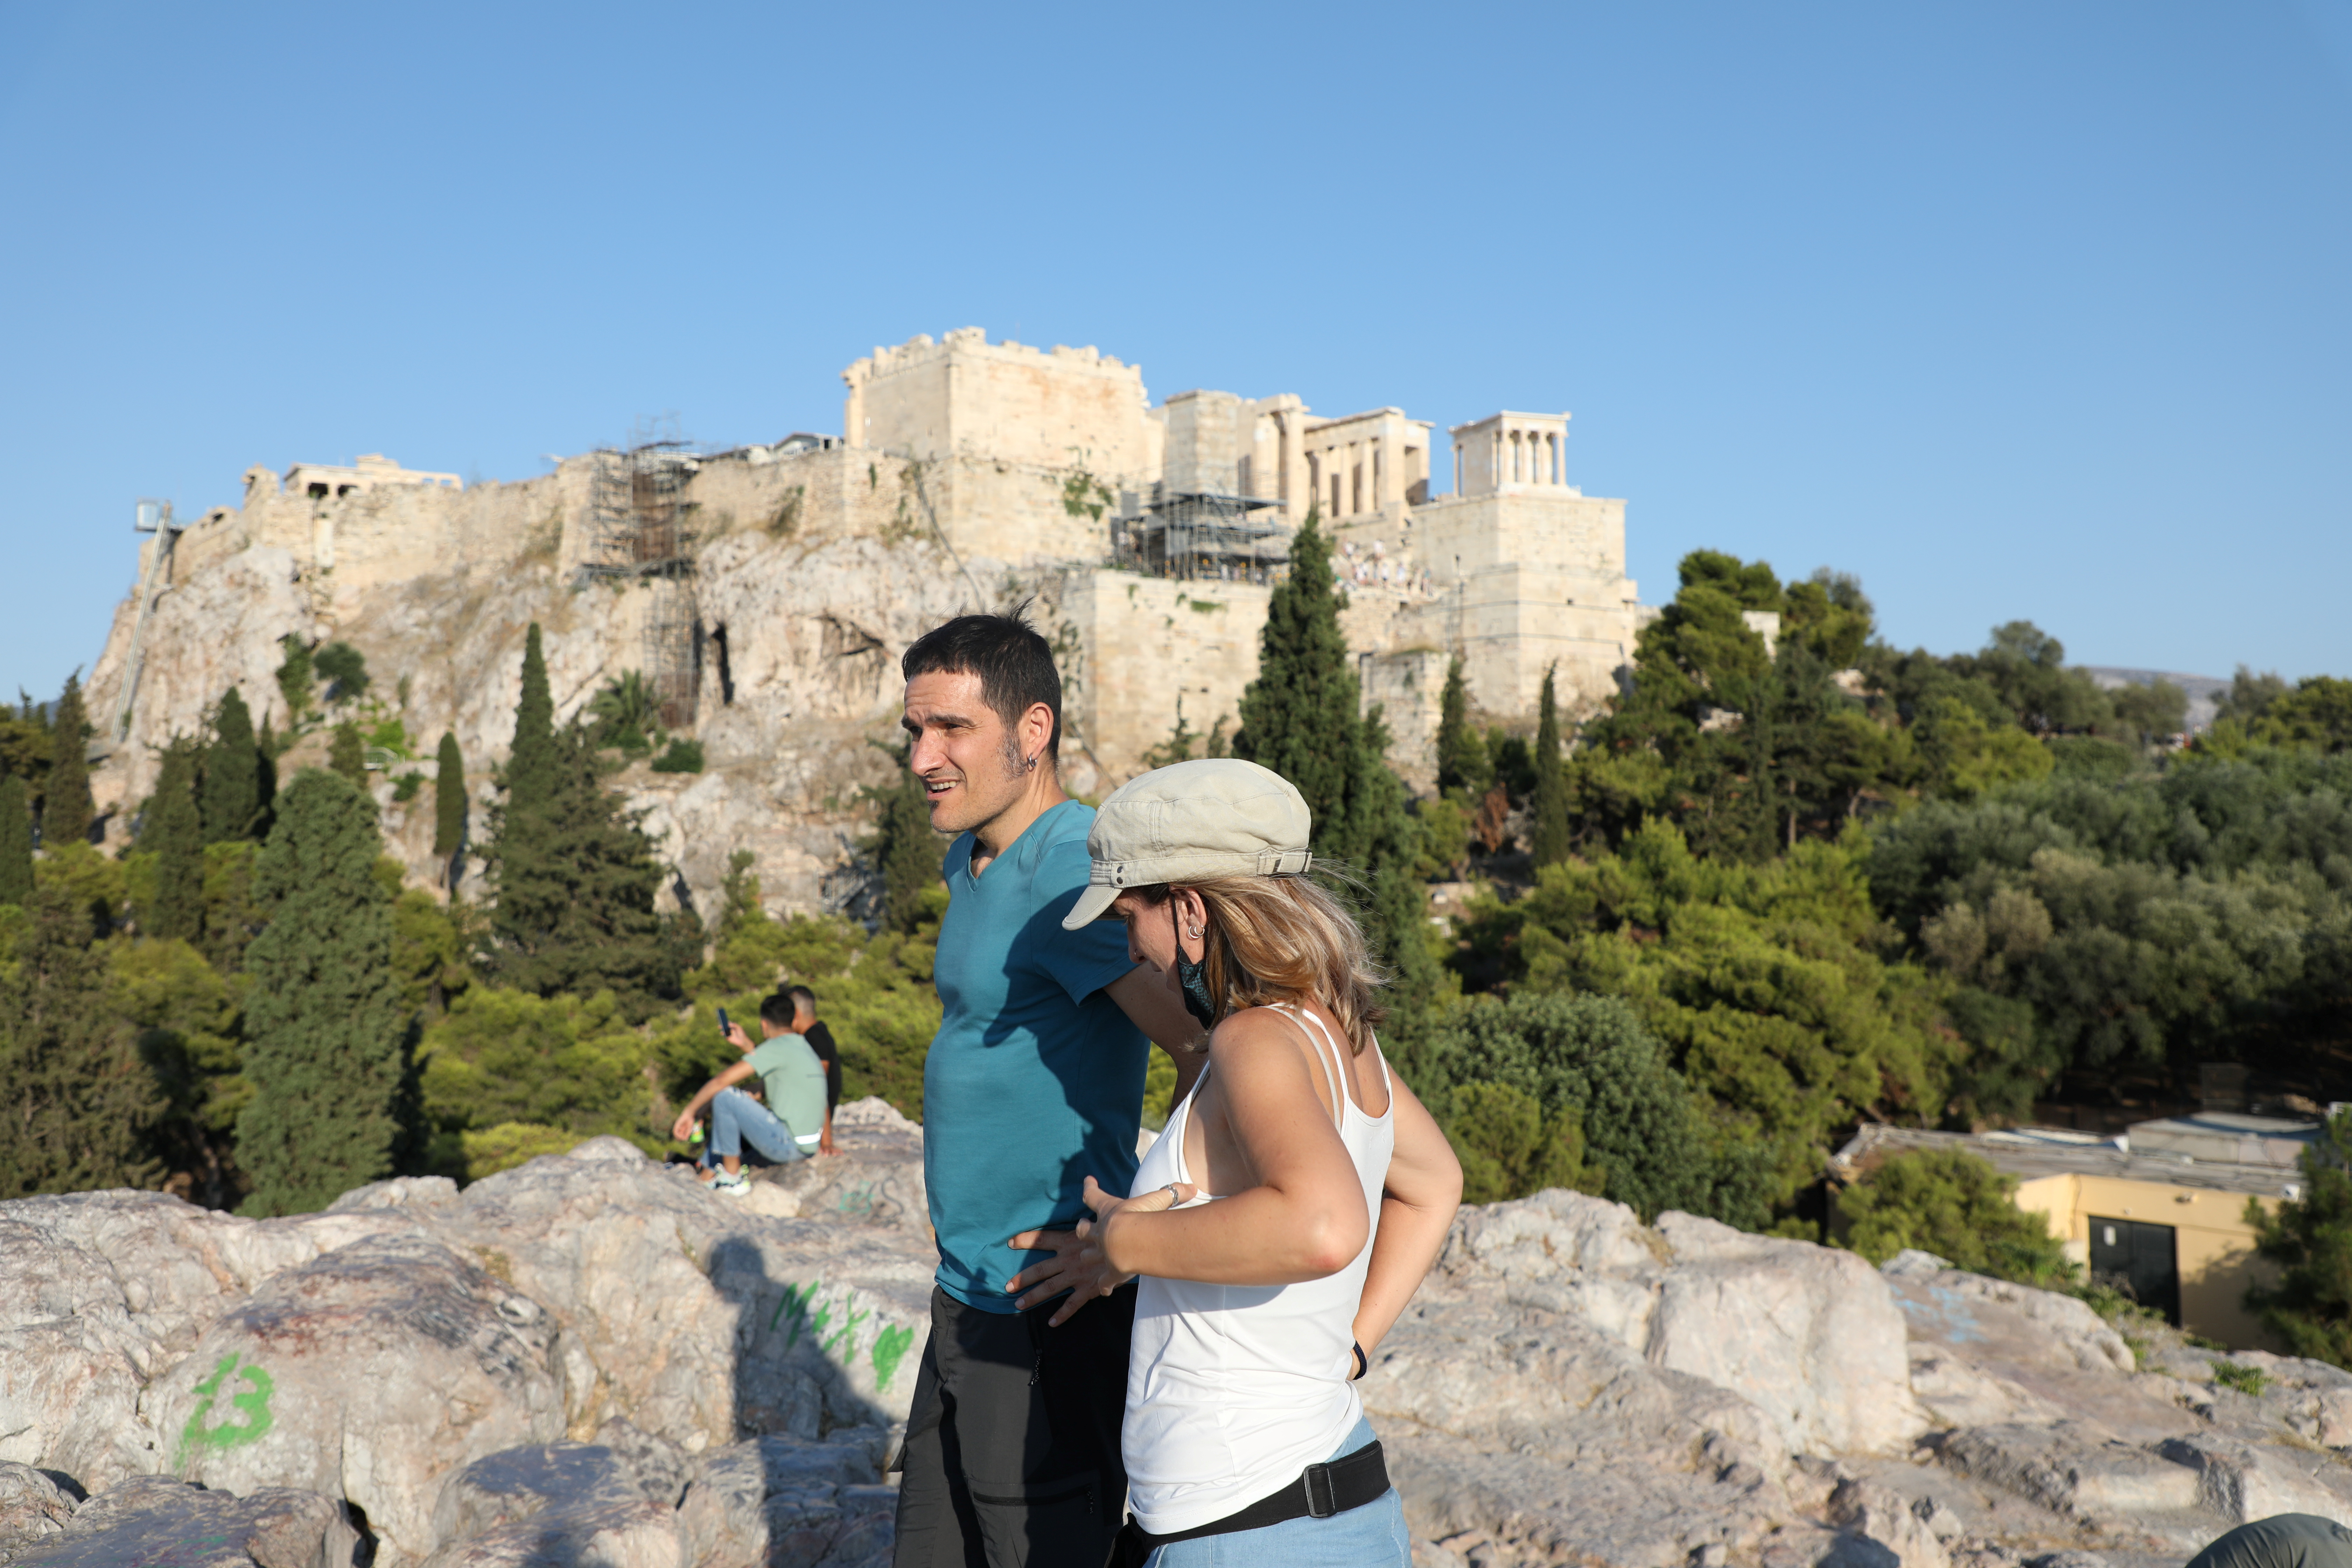 People visit the Areios Pagos hill with Acropolis in the background in Athens